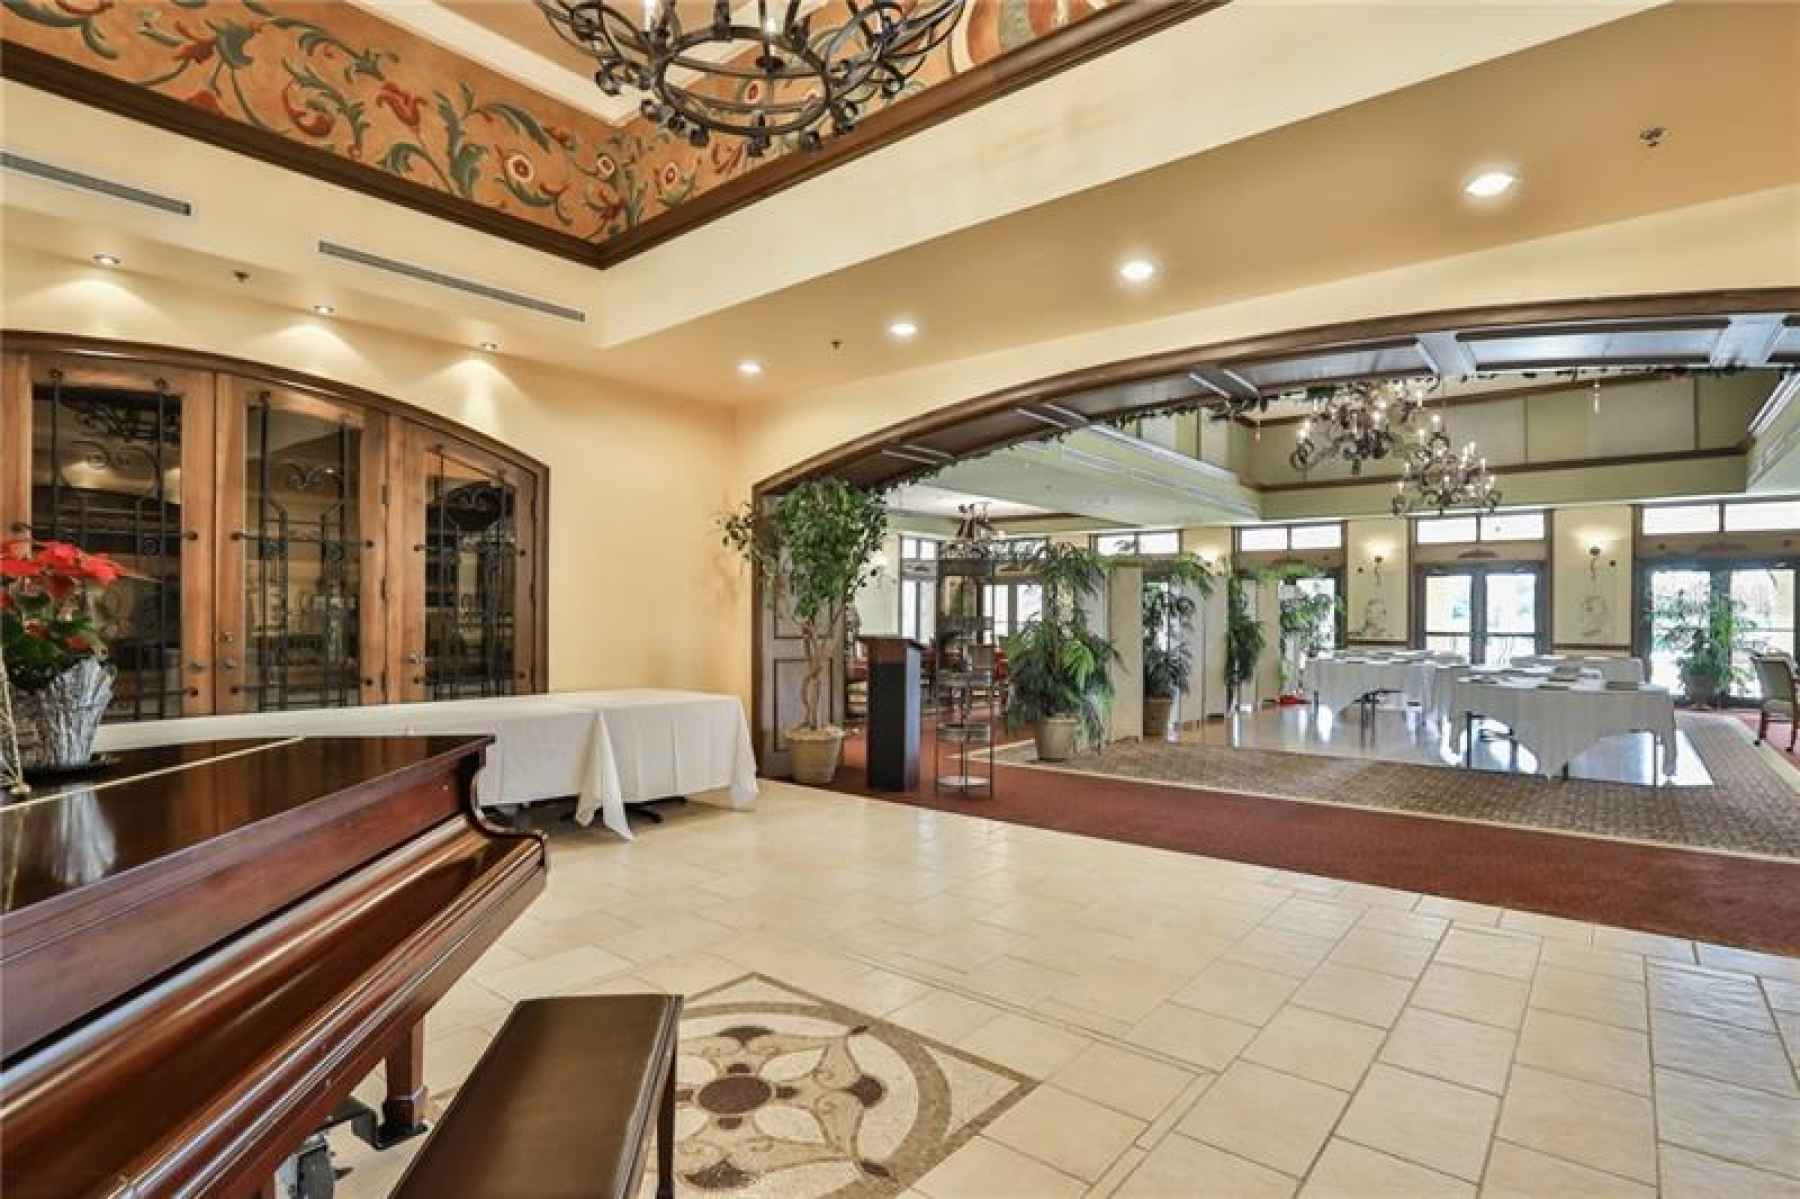 Renaissance Club has formal dining and social events.